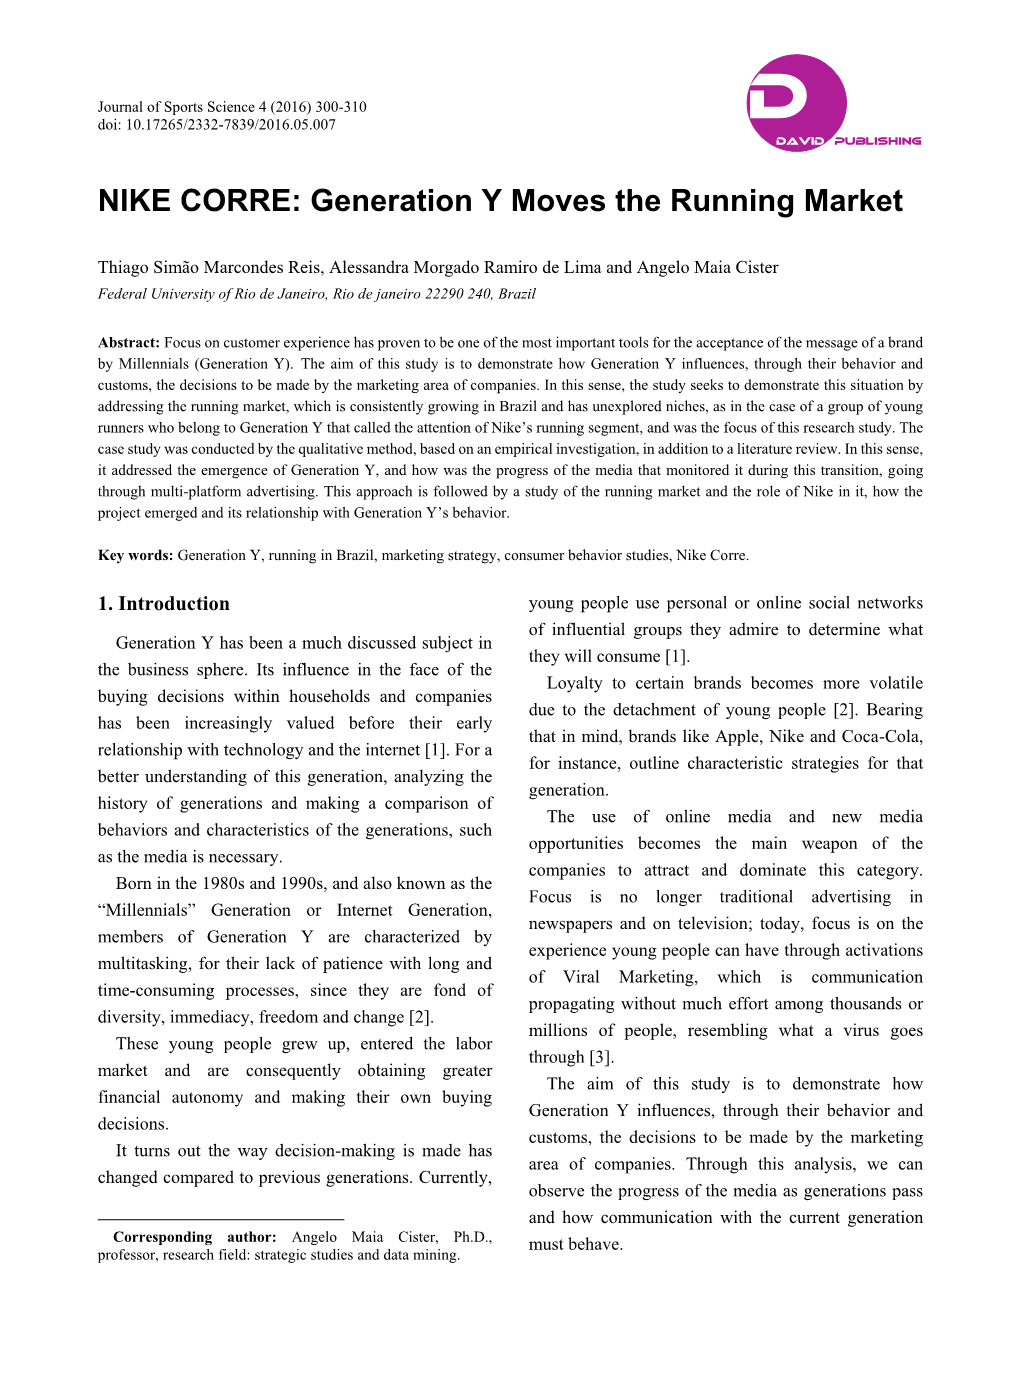 NIKE CORRE: Generation Y Moves the Running Market